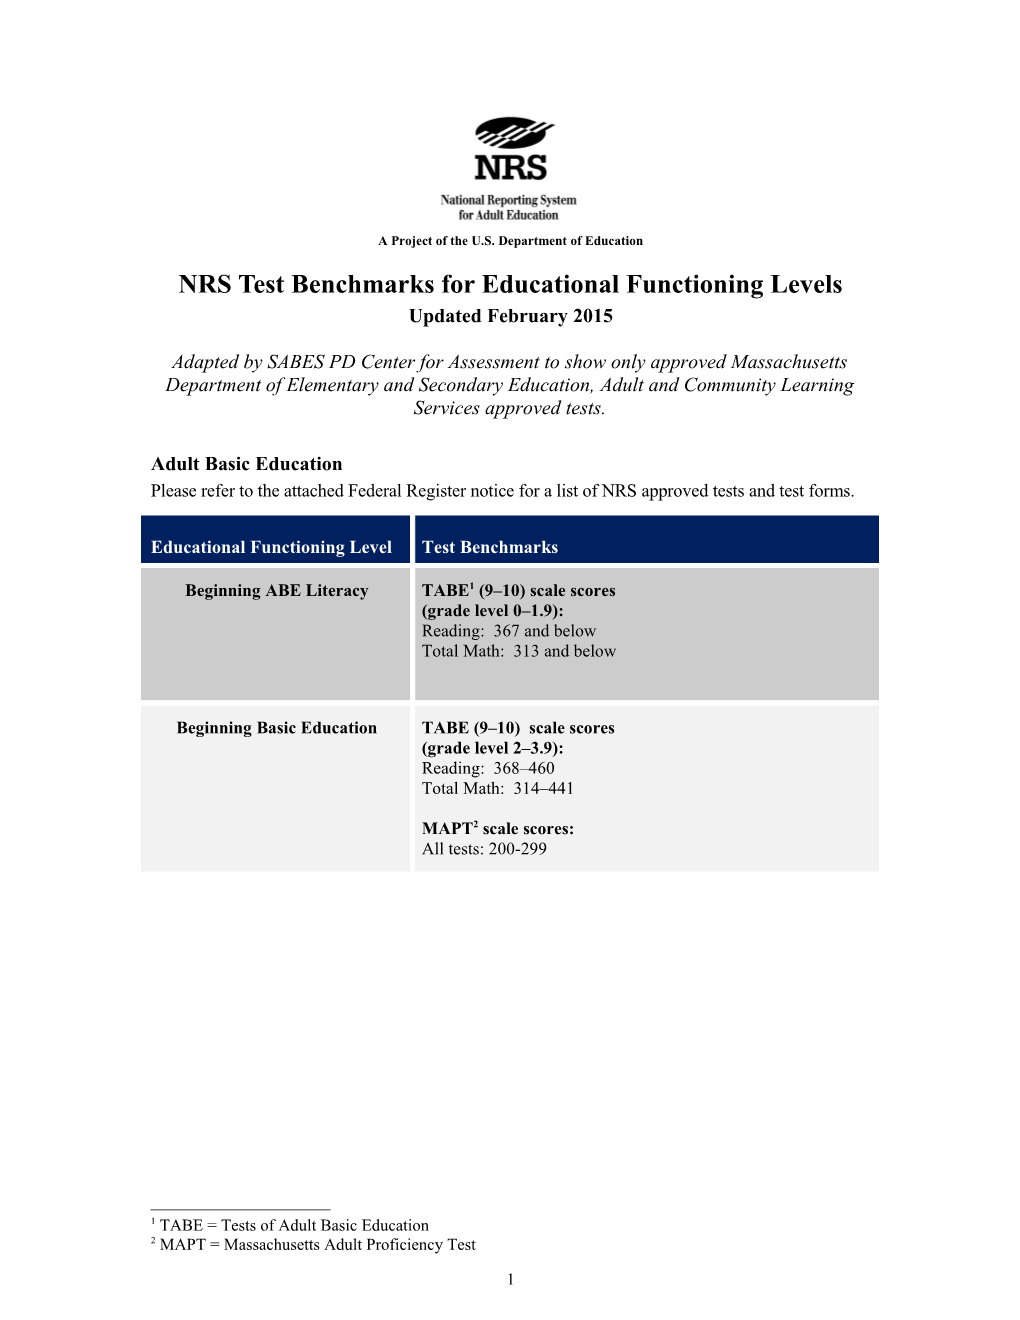 NRS Test Benchmarks for Educational Functioning Levels